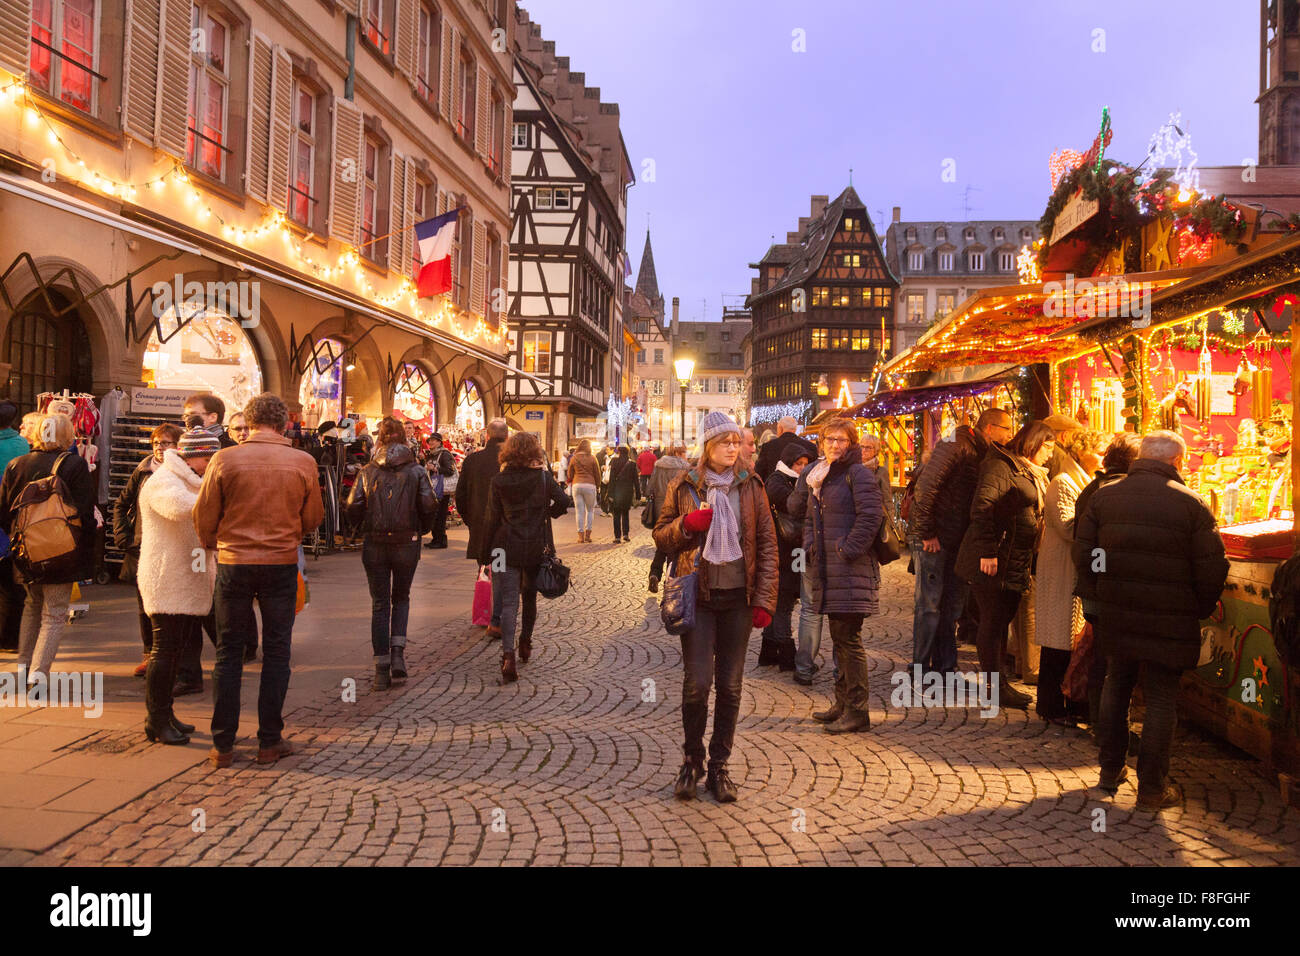 People shopping at Strasbourg Christmas market, Place de la cathedrale, Strasbourg, Alsace, France Europe Stock Photo